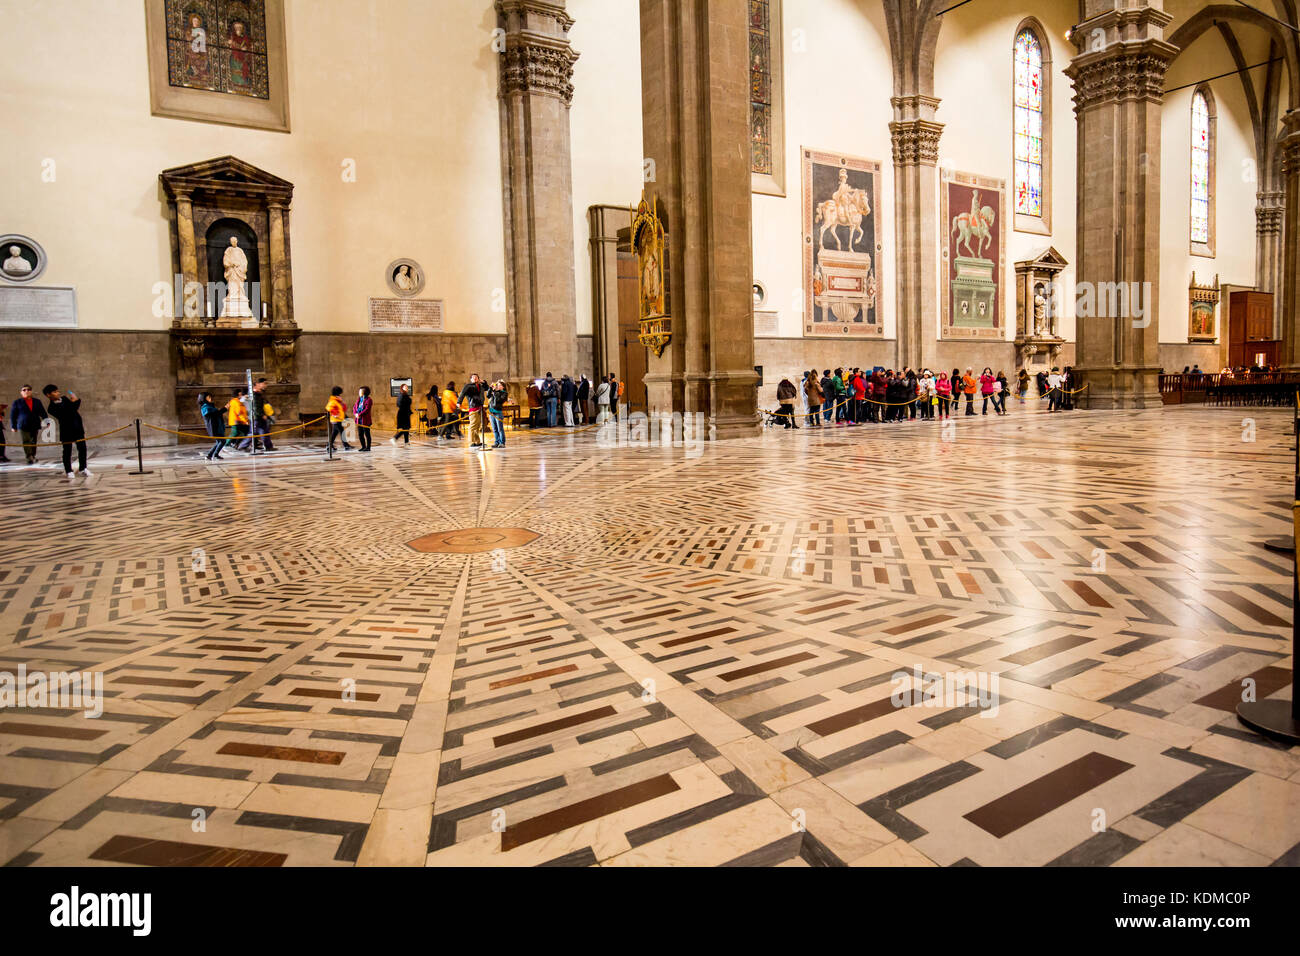 Interior of the Duomo in Florence Italy Stock Photo